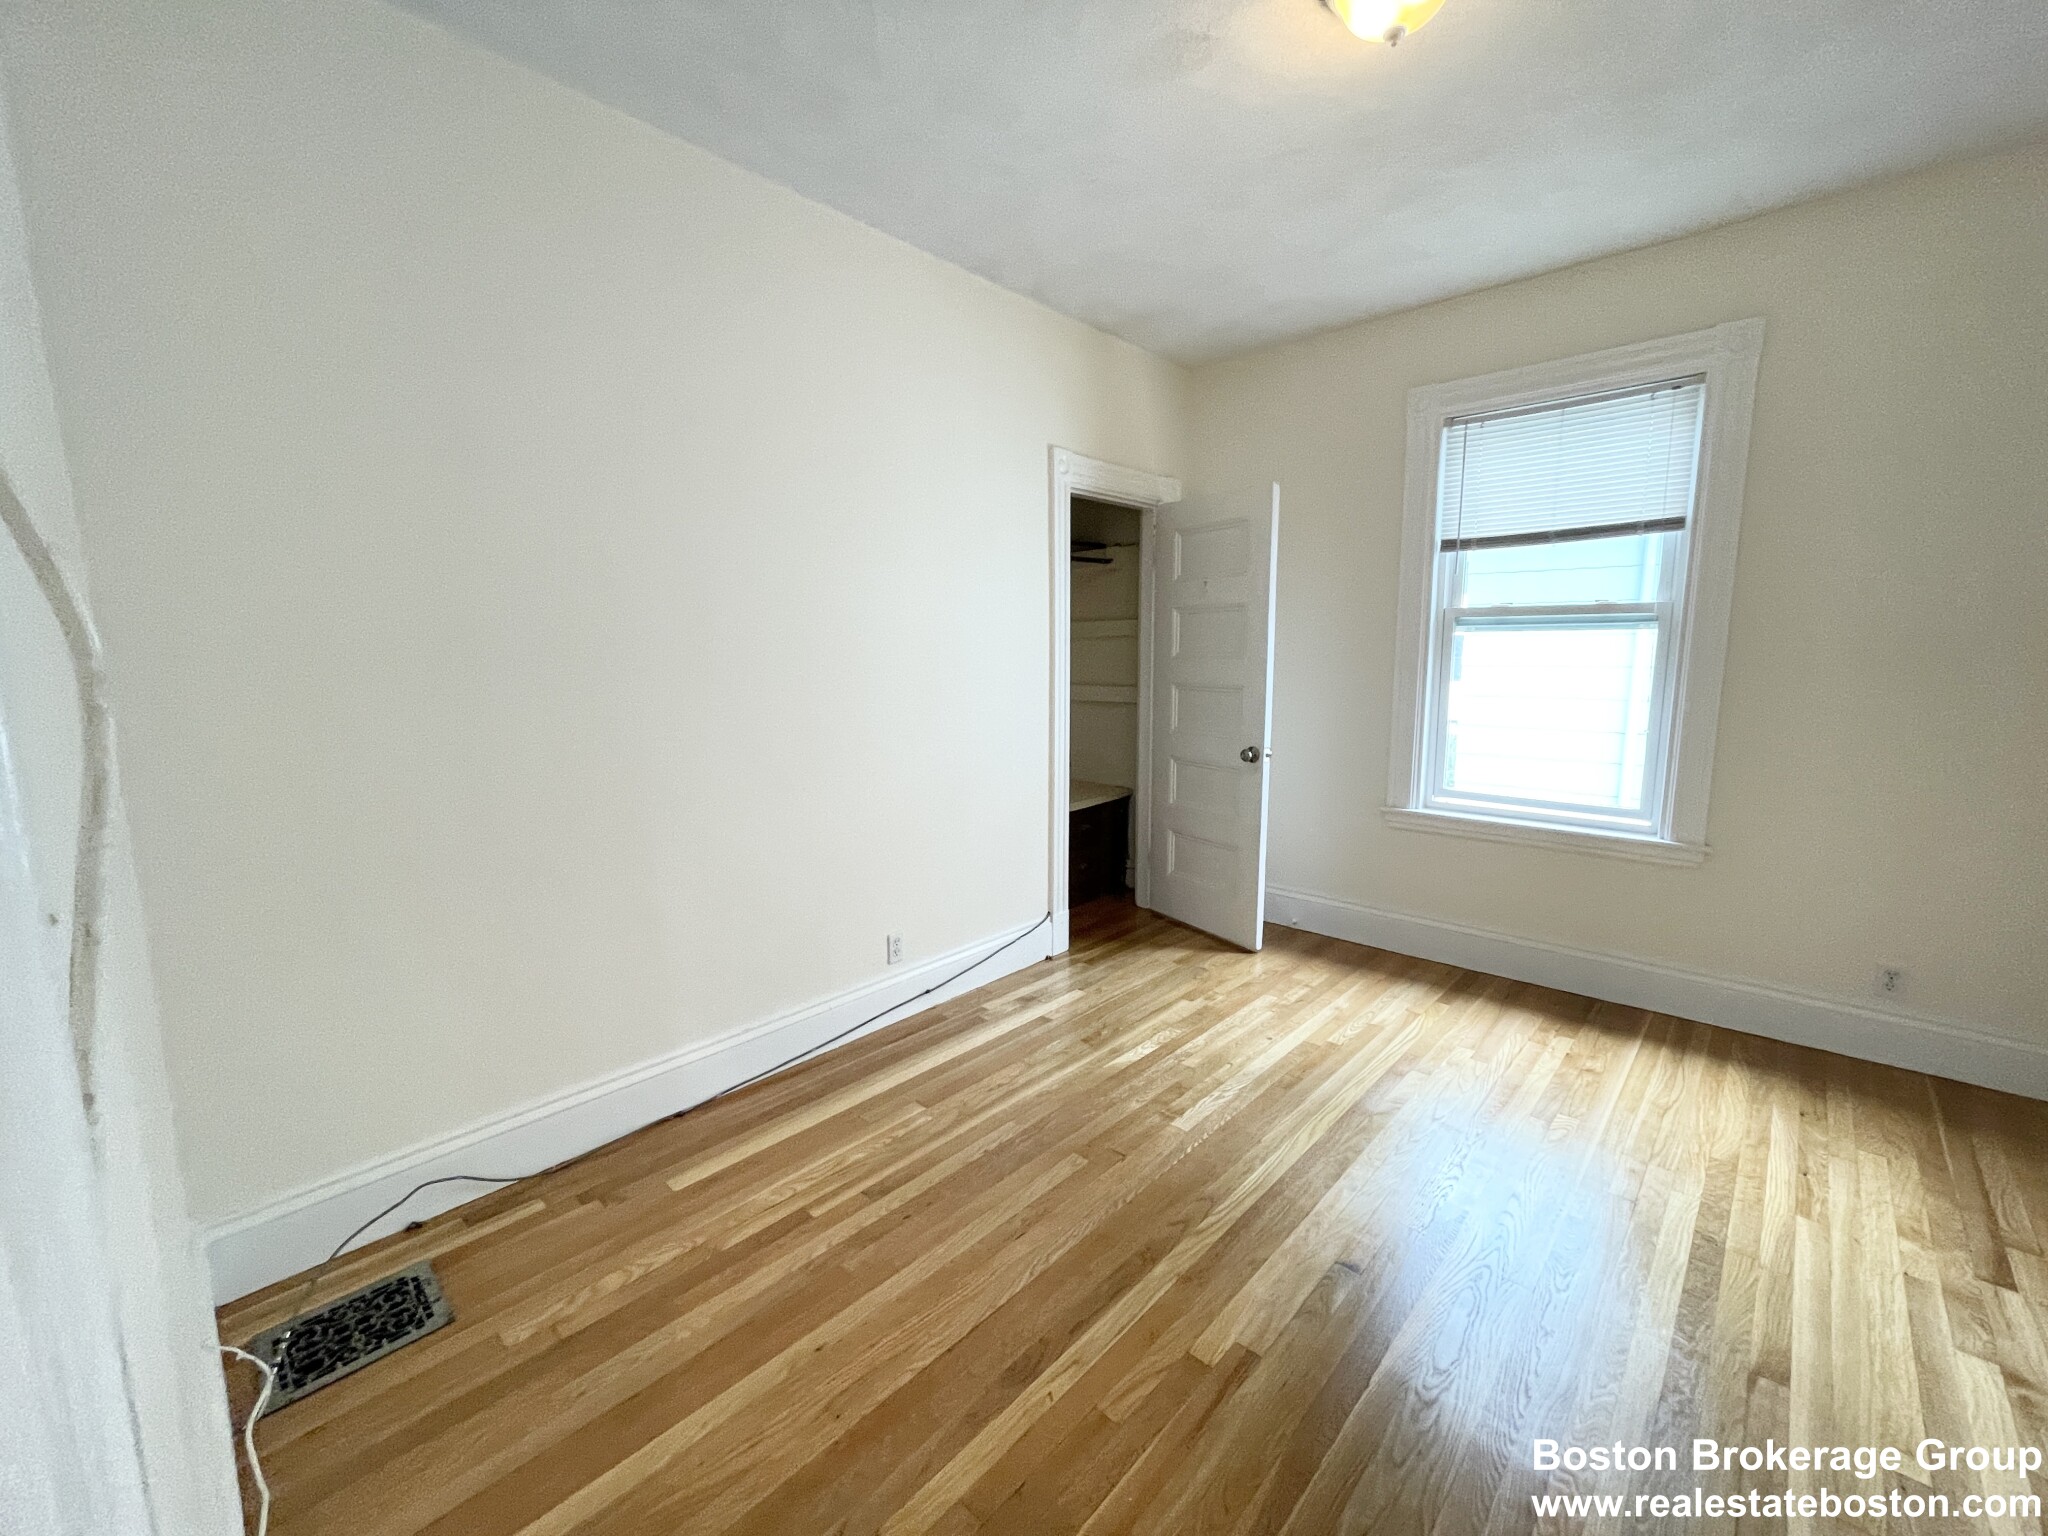 Photos of apartment on Roseclair St.,Boston MA 02125